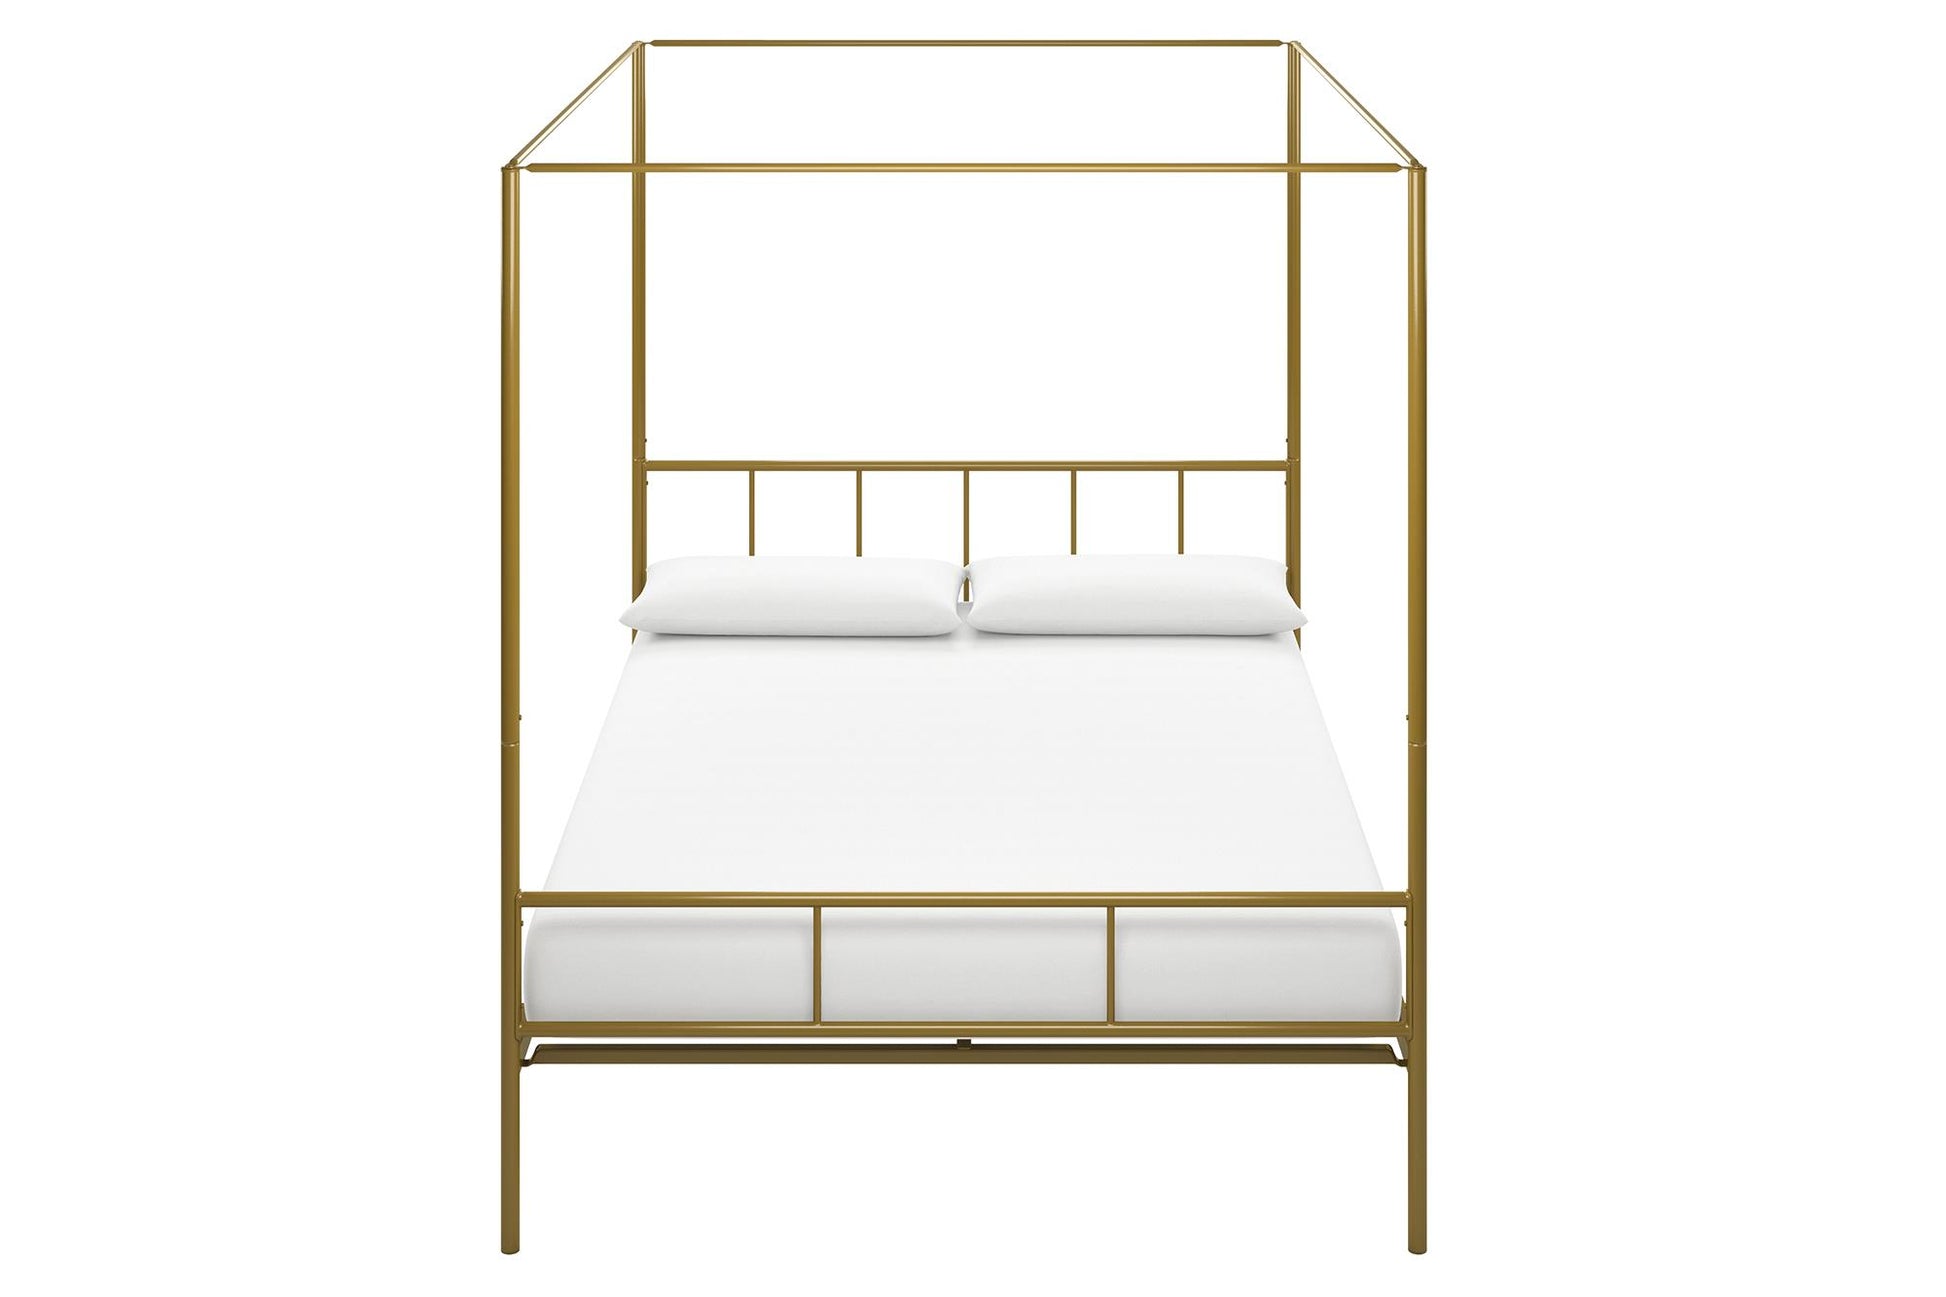 Marion Canopy Bed - Gold - Full